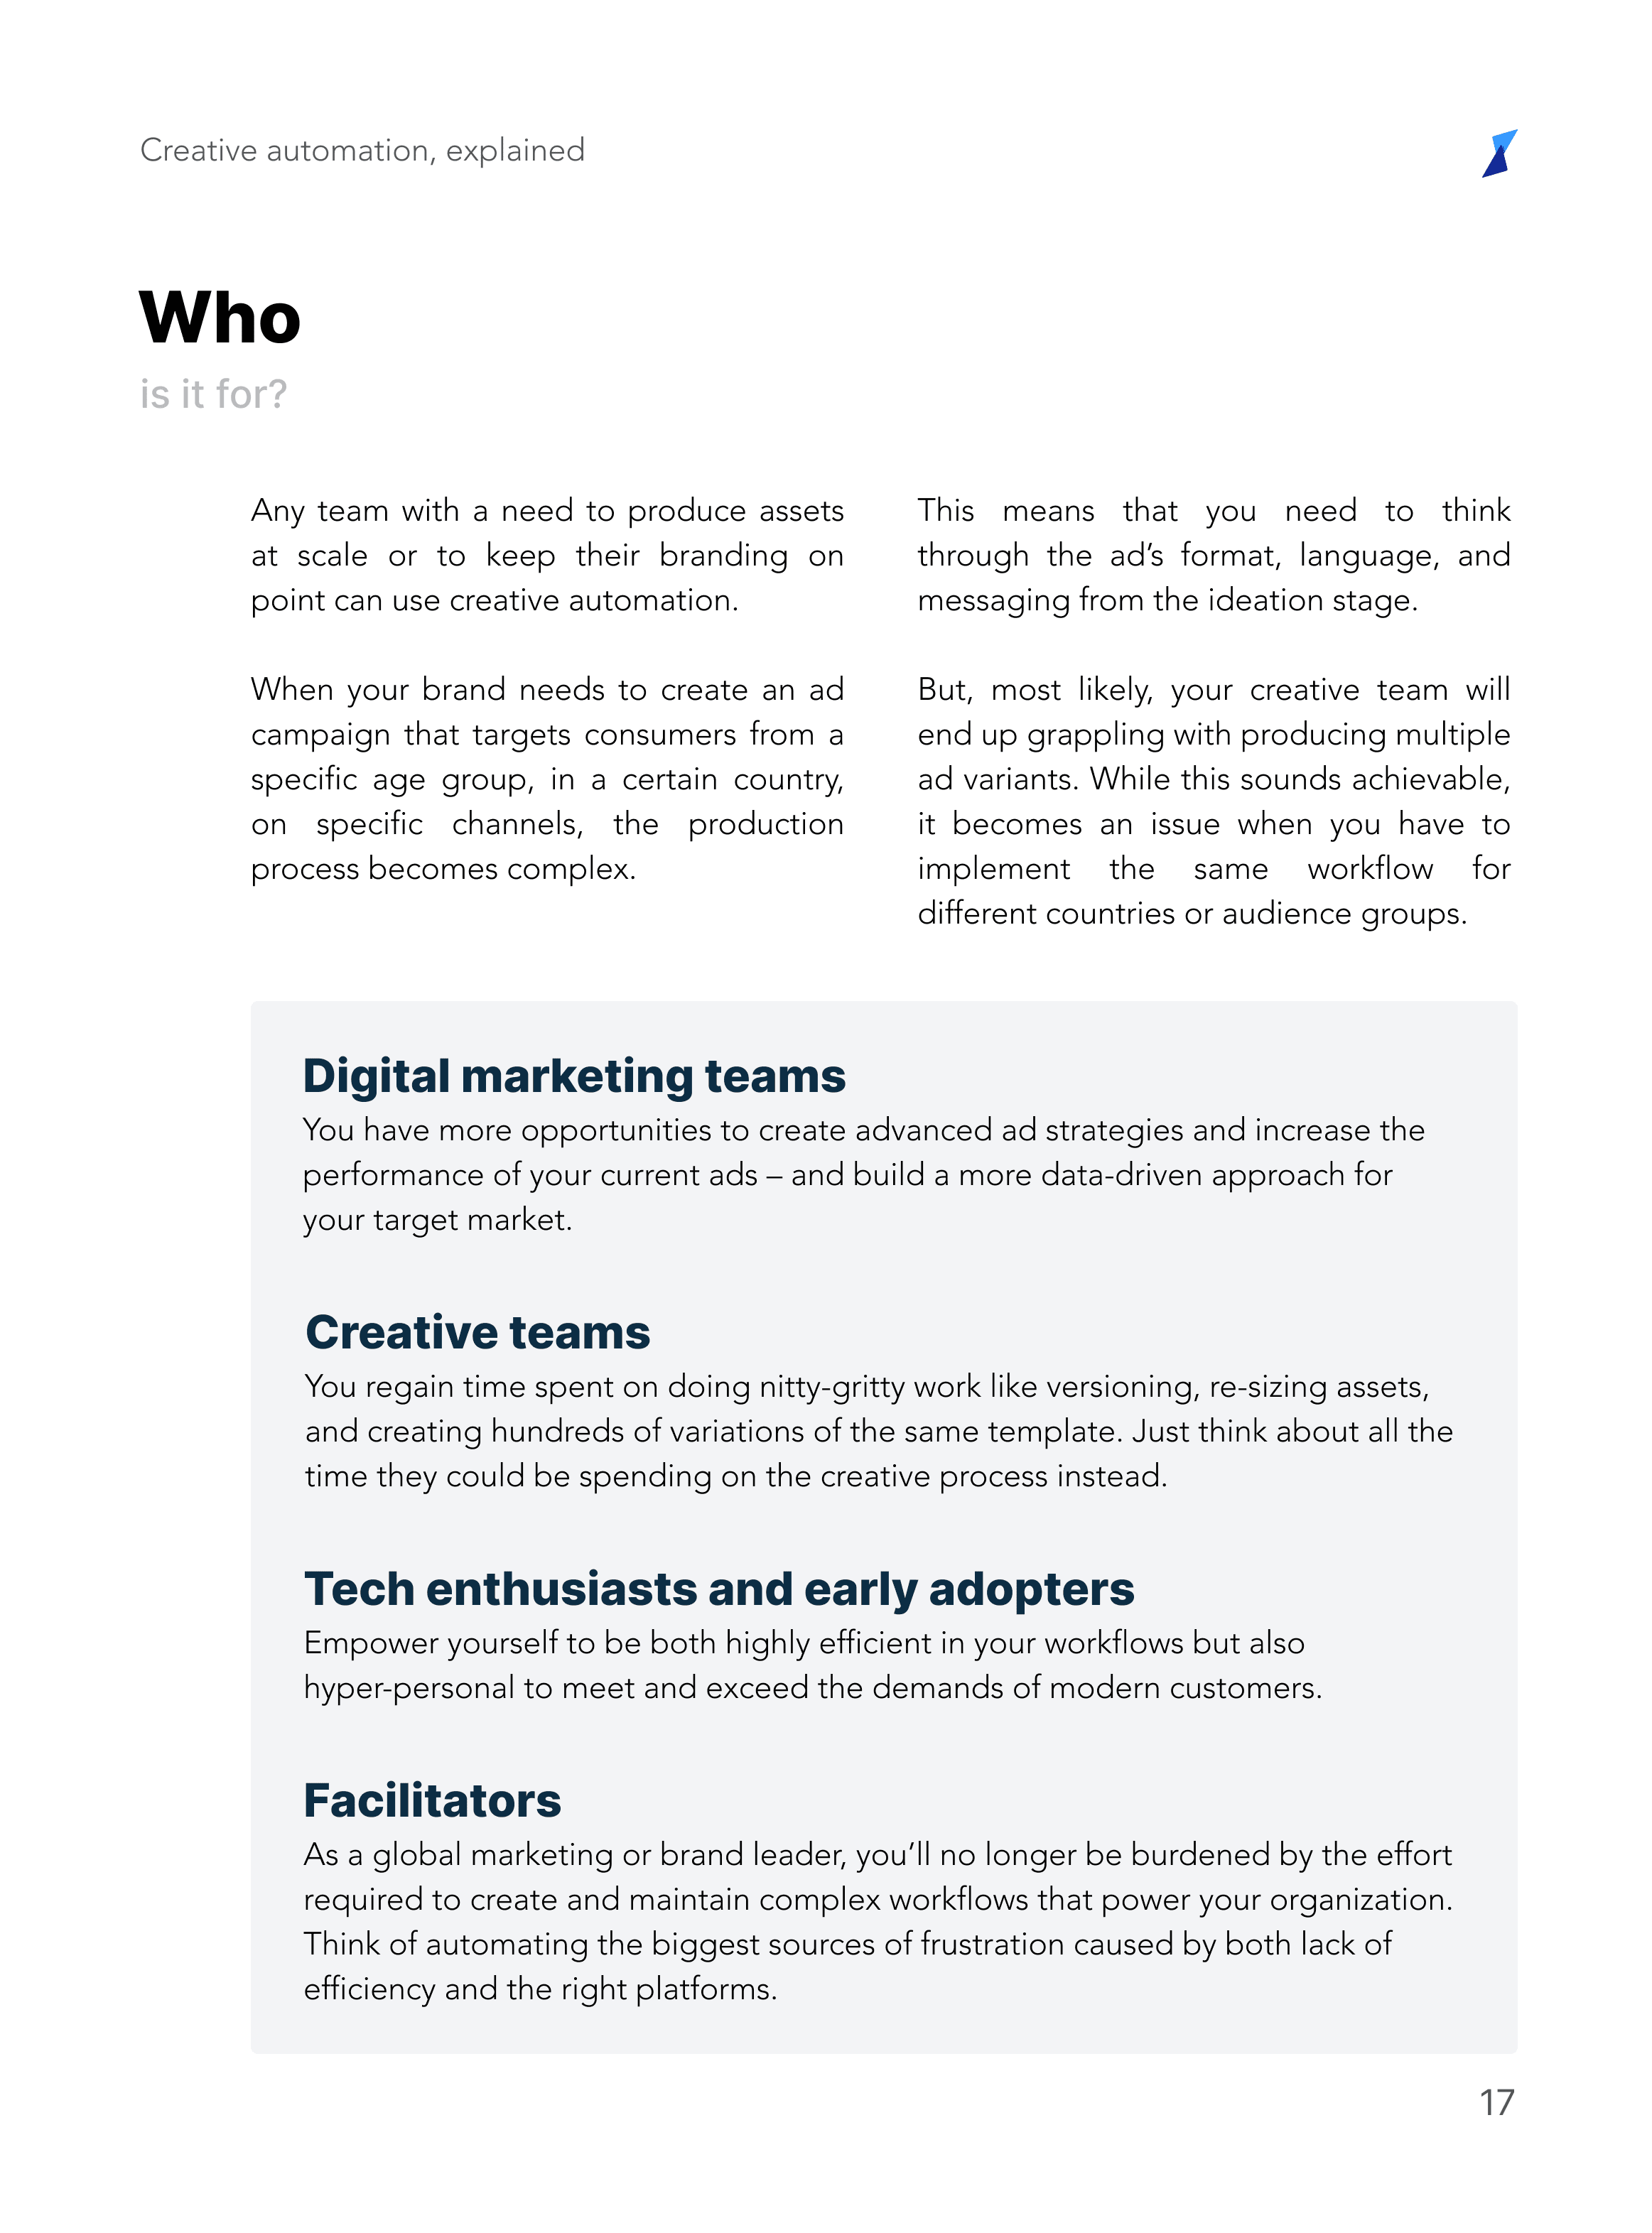 Creative Automation guide: who is it for? - Digital marketing teams - Creative teams - Tech enthusiasts and early adopters - Facilitators